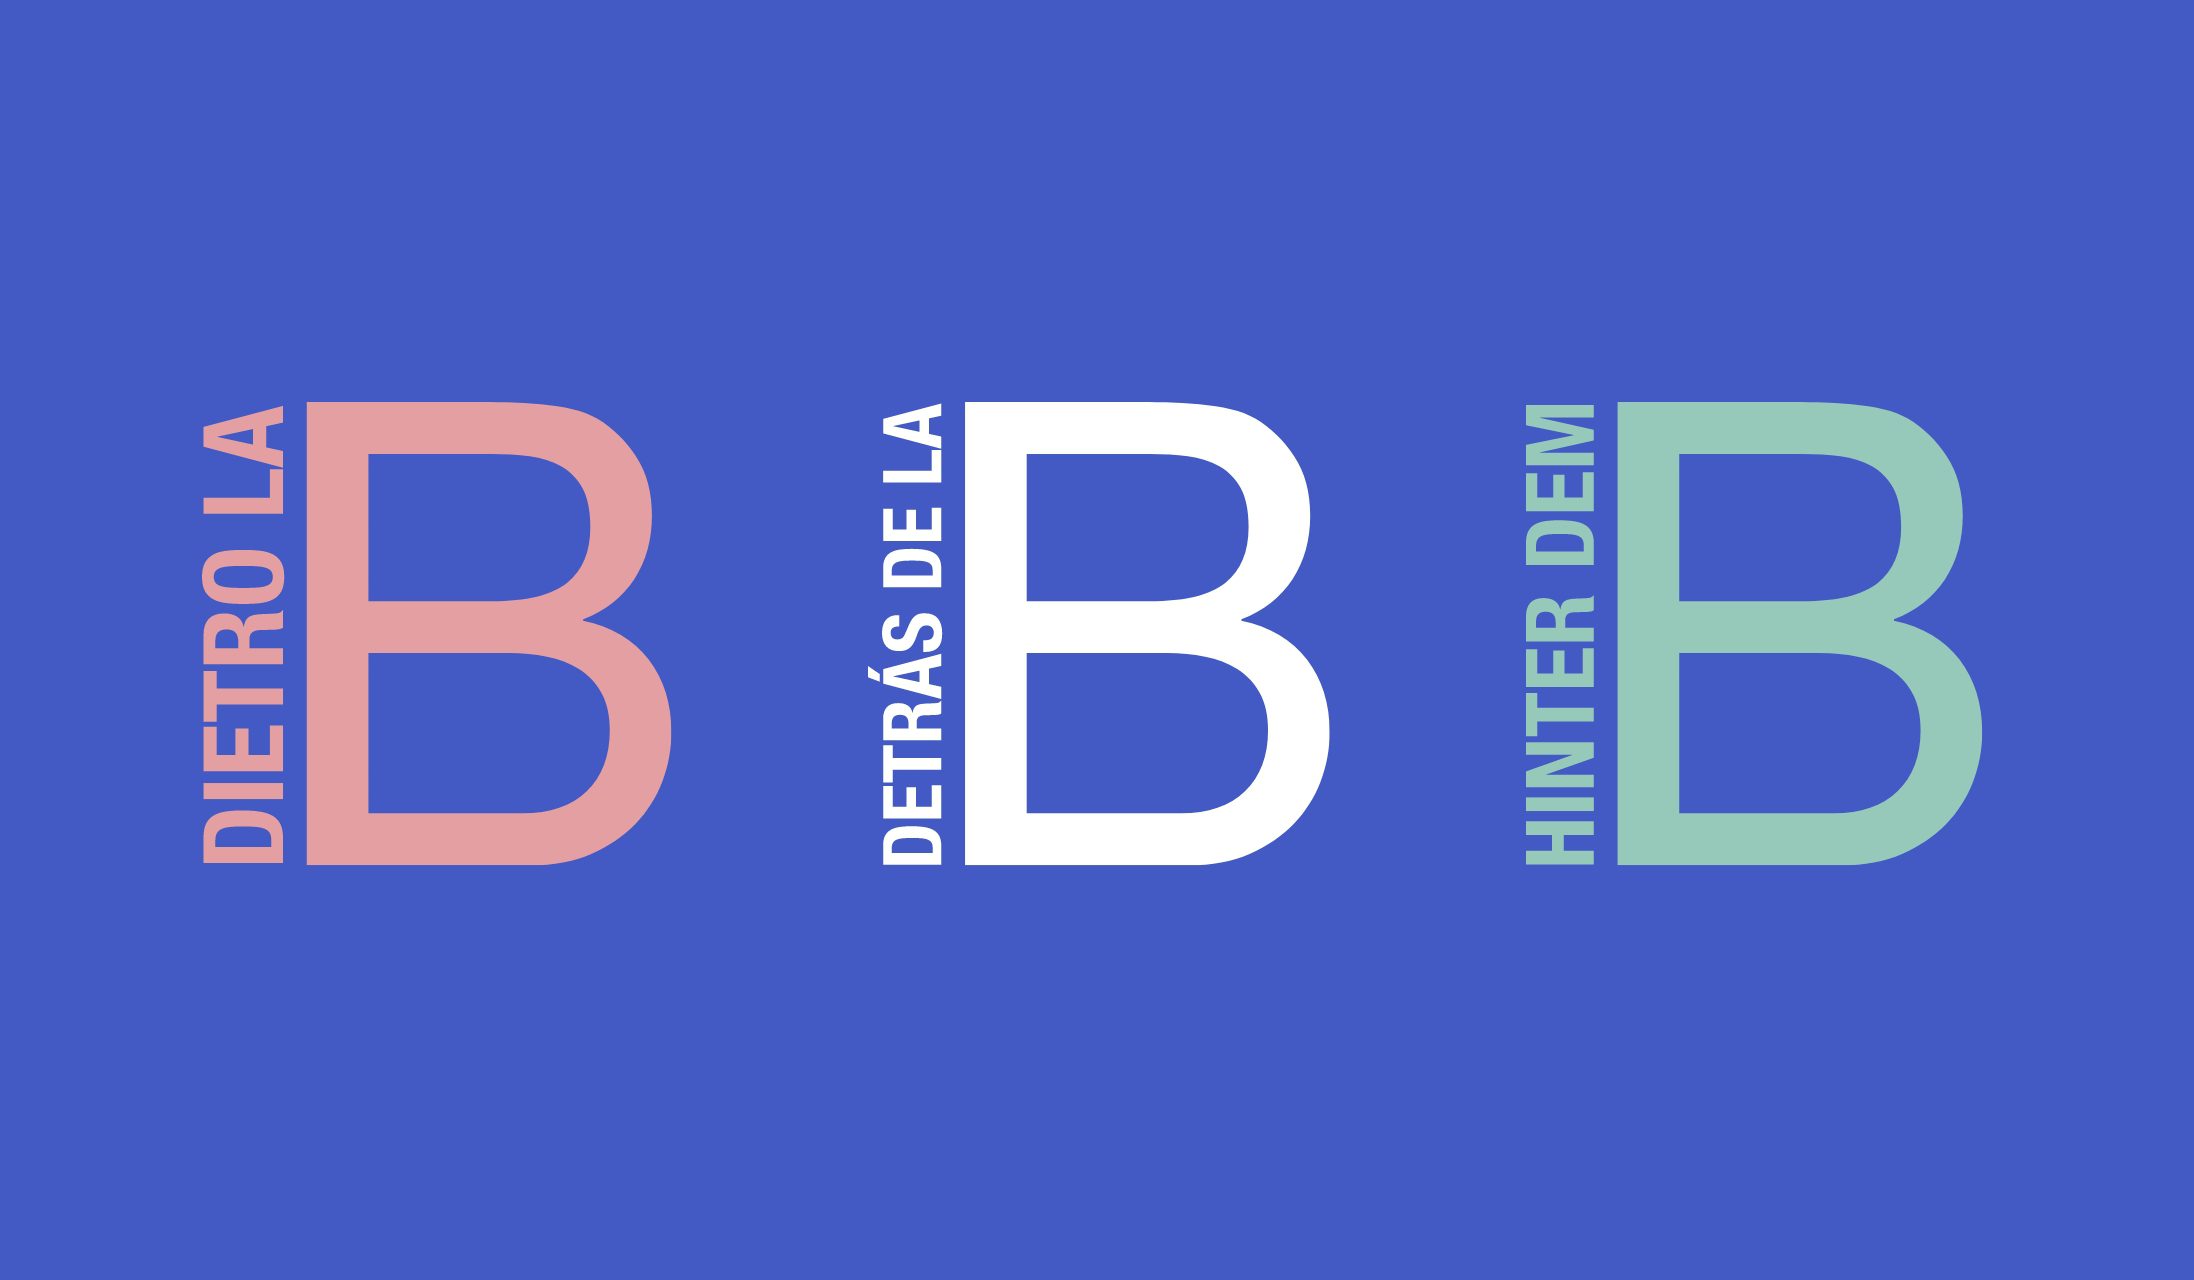 Behind The B campaign logos